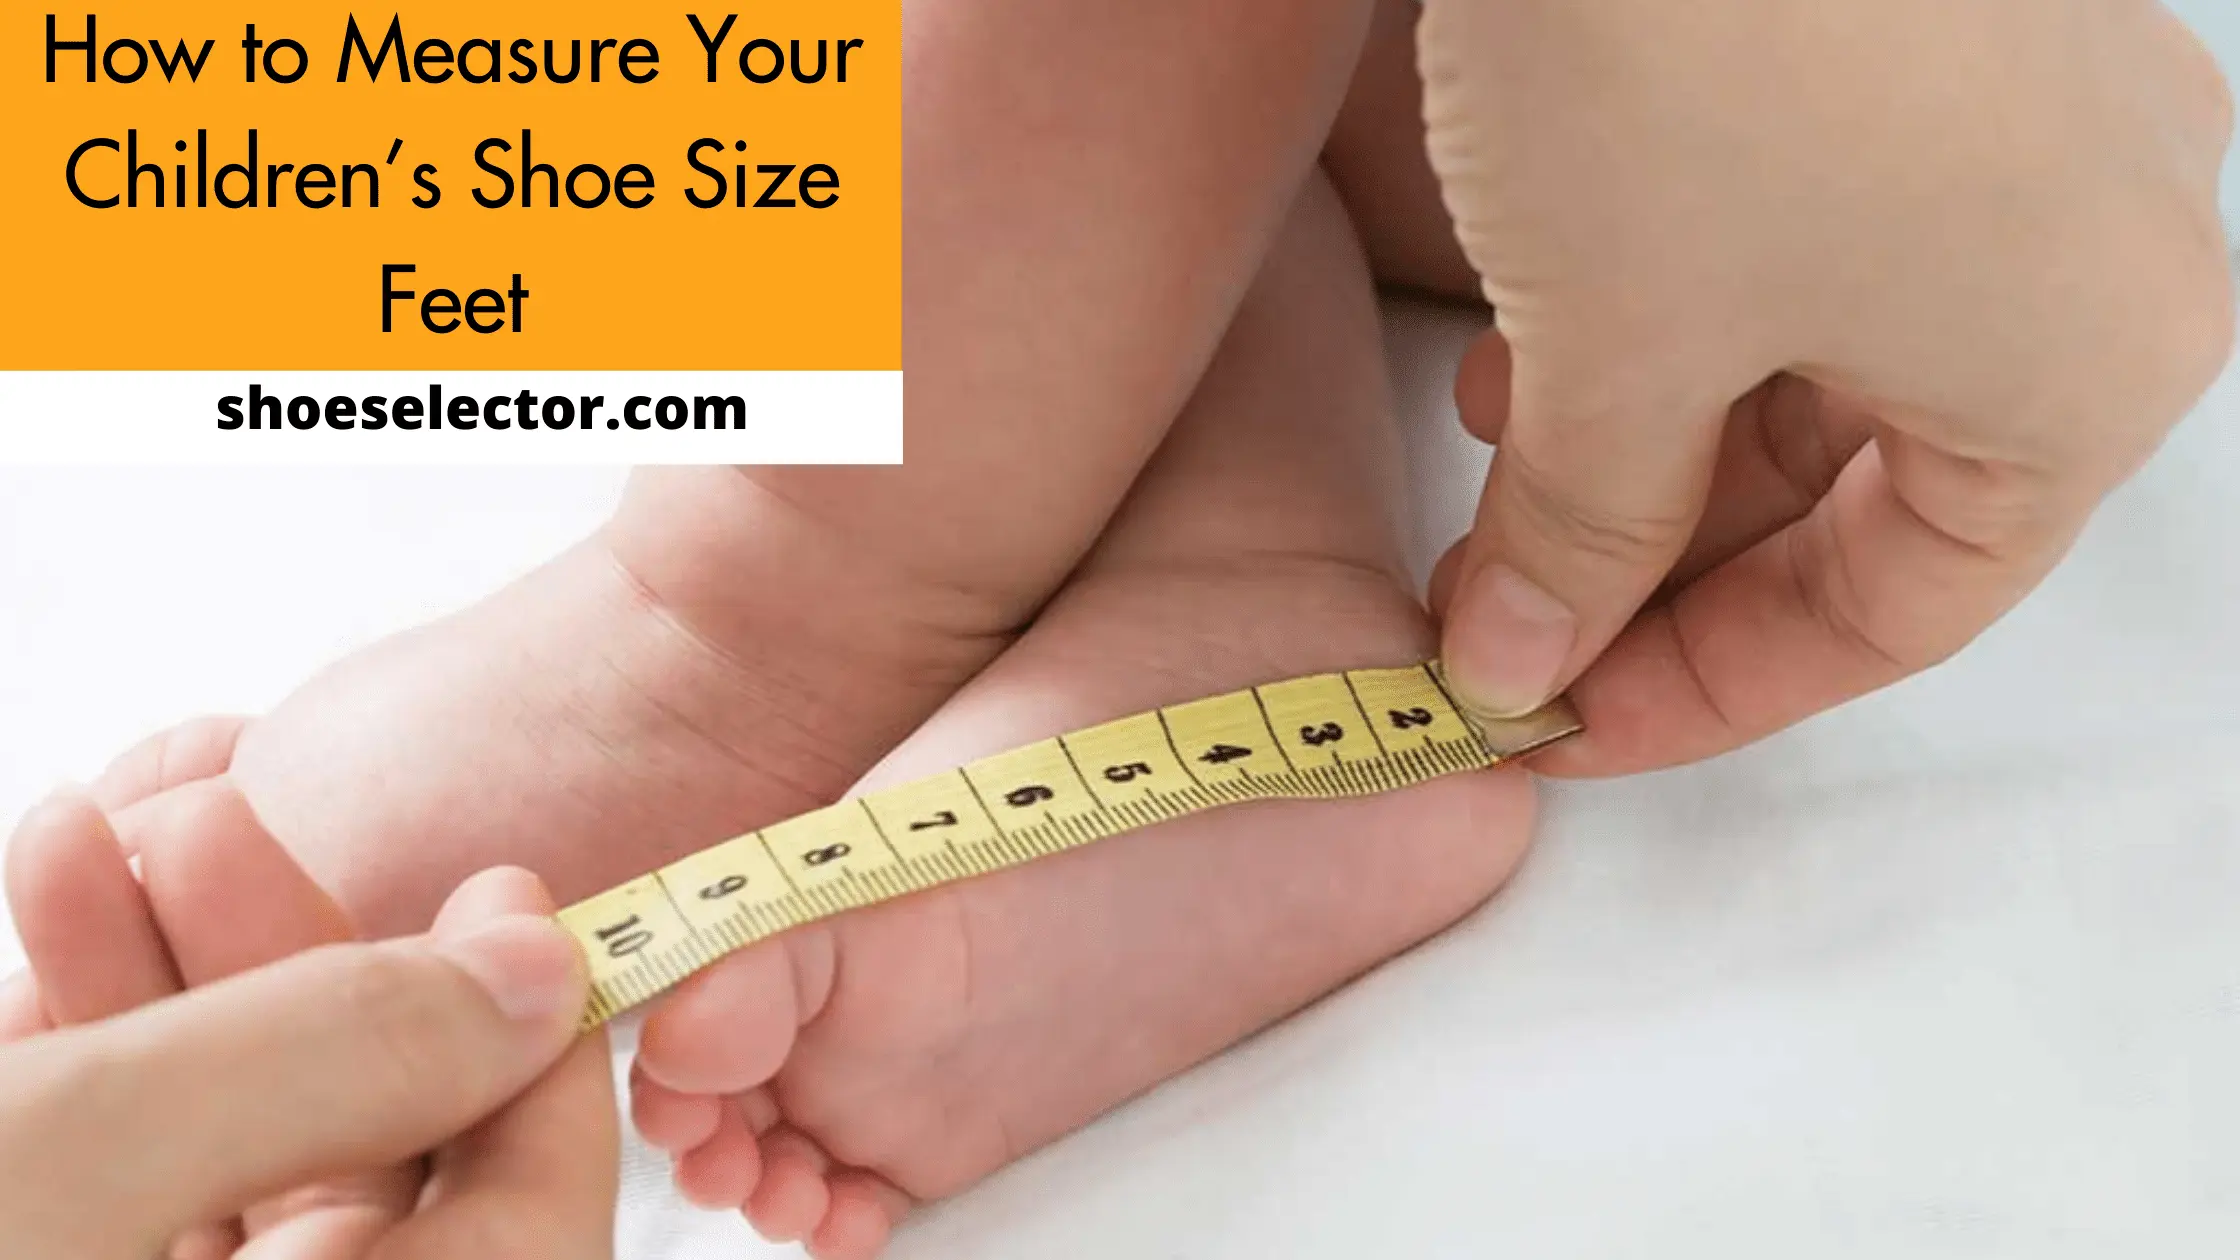 How to Measure Your Children’s Shoe Size Feet?